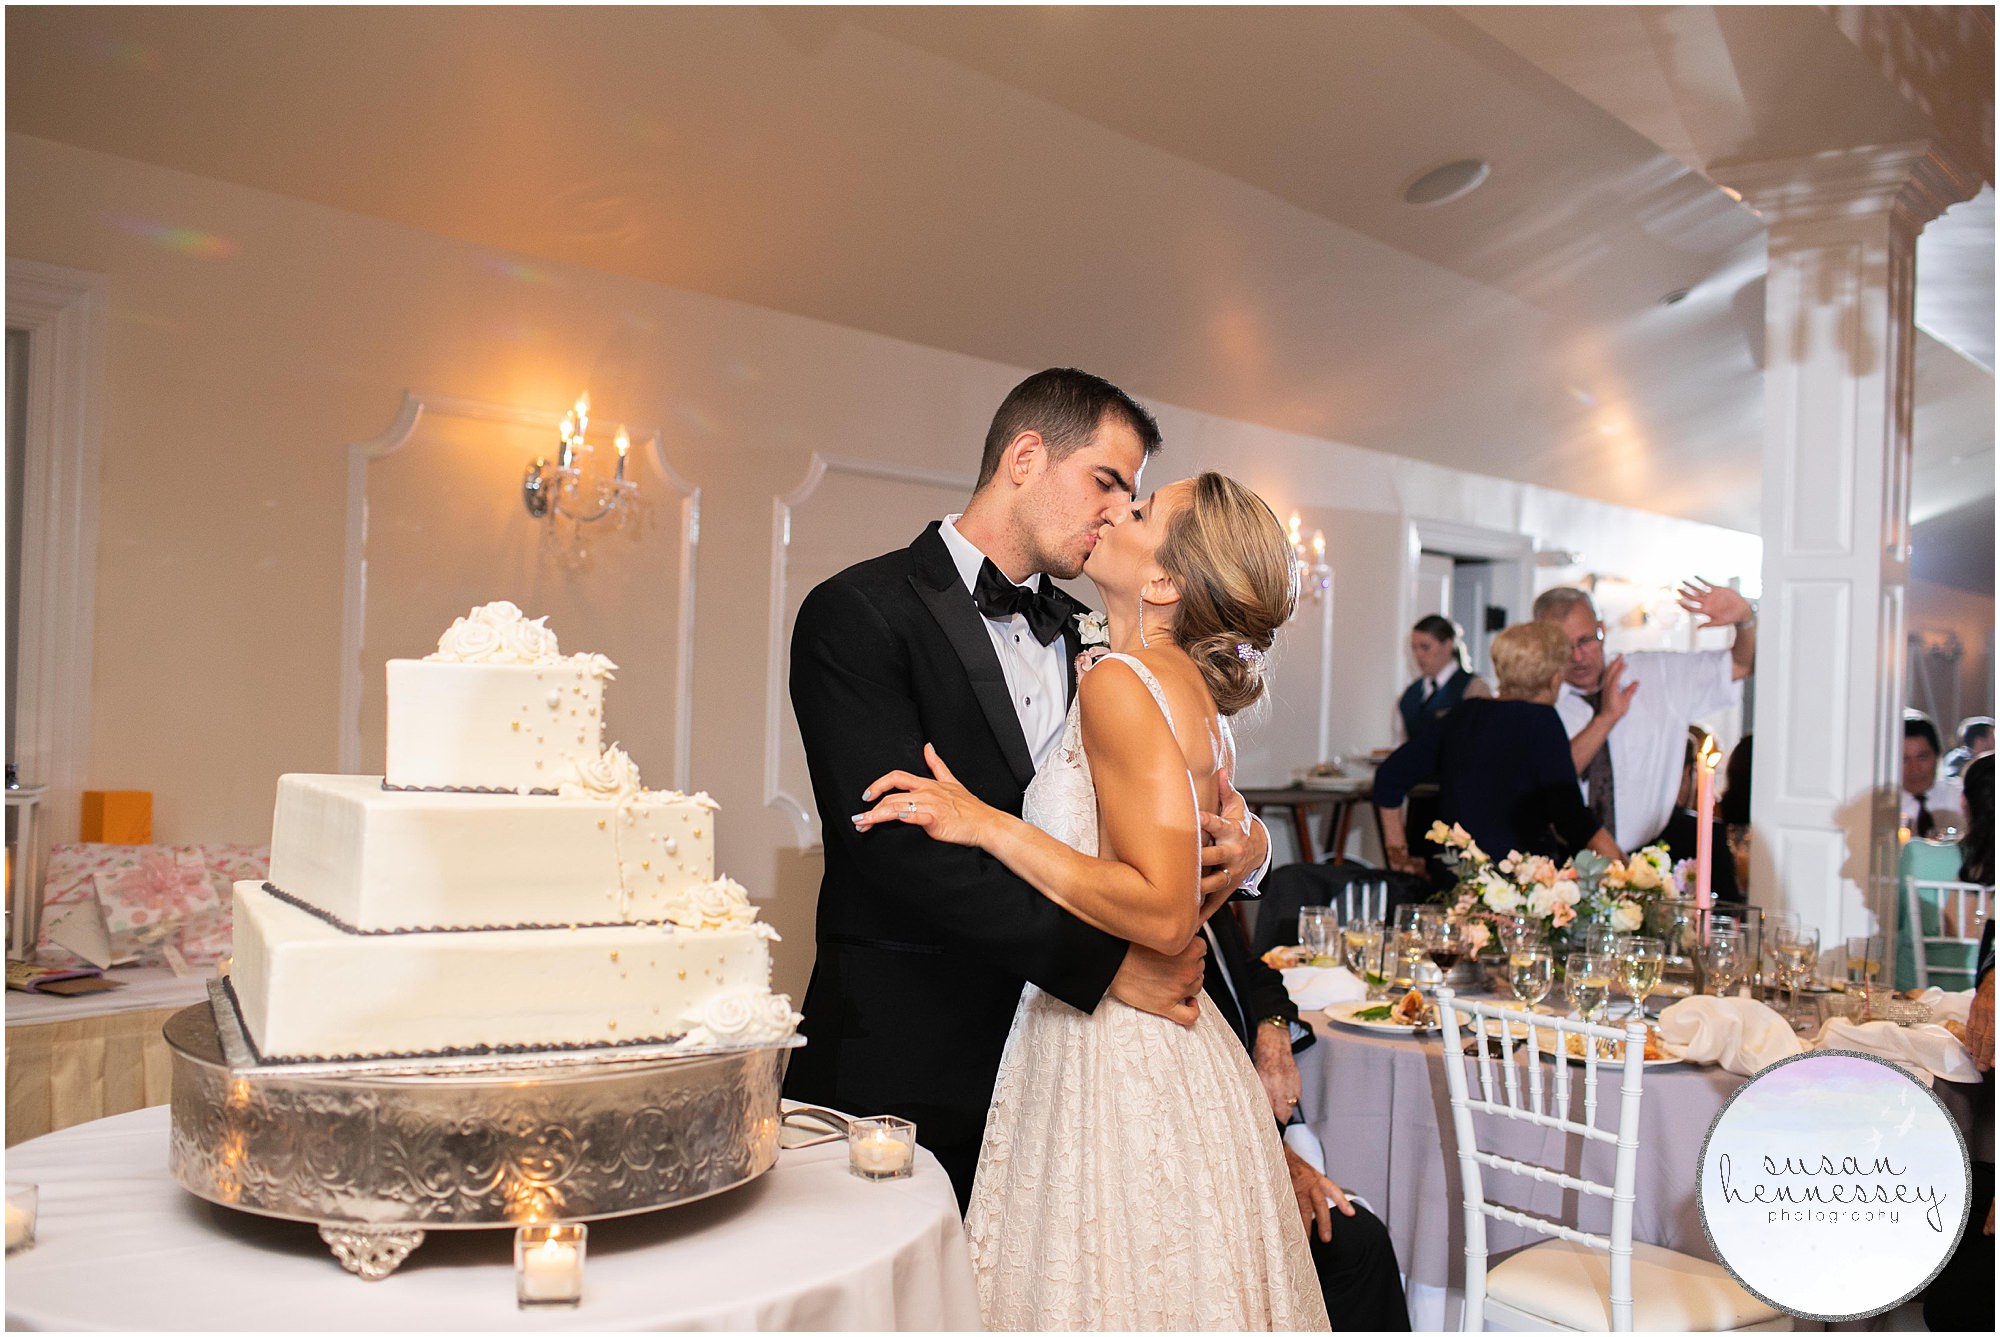 Couple cuts their cake at Jersey Shore wedding reception.